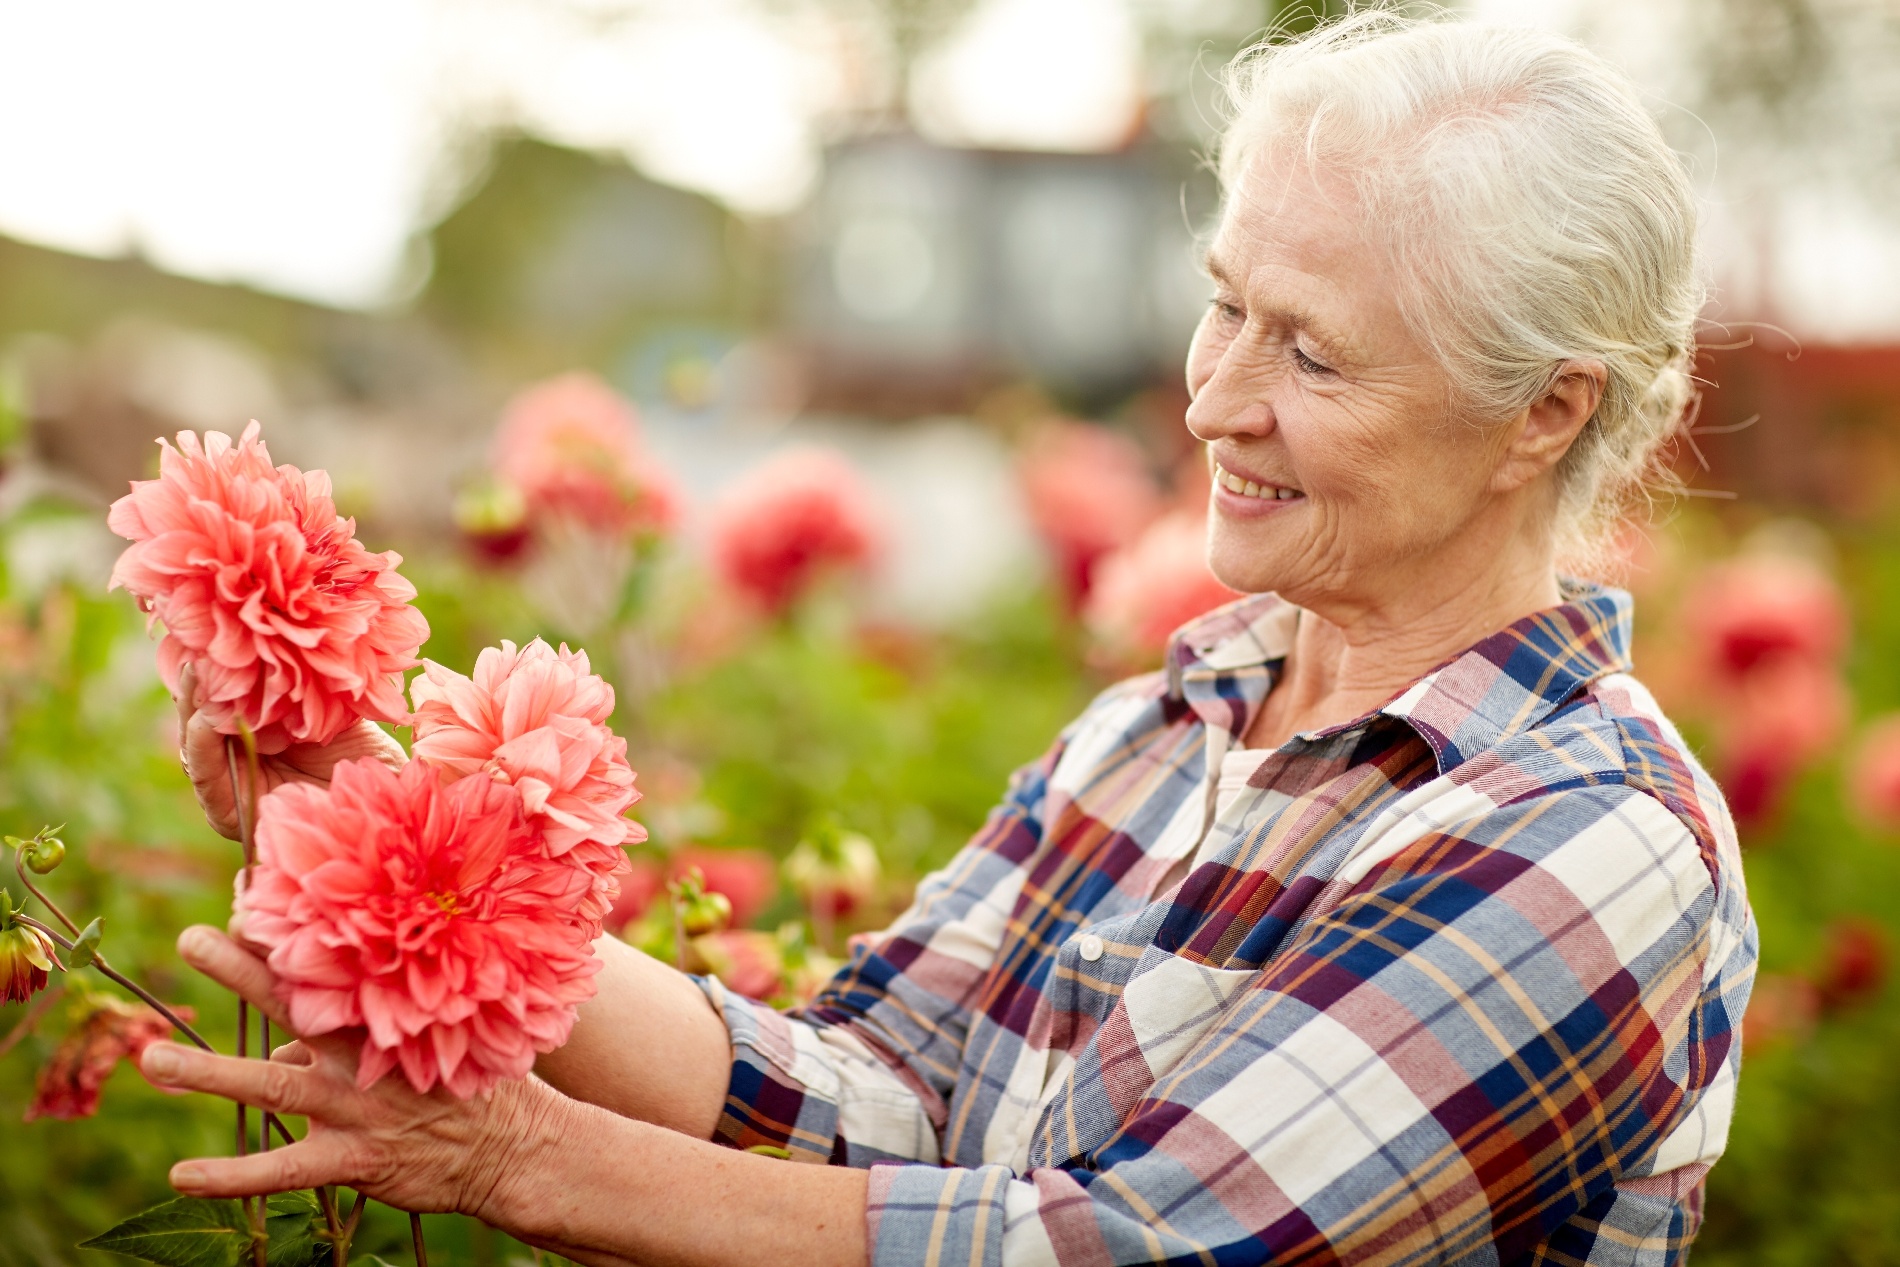 An older woman looks at her fresh cut flowers while gardening outdoors.